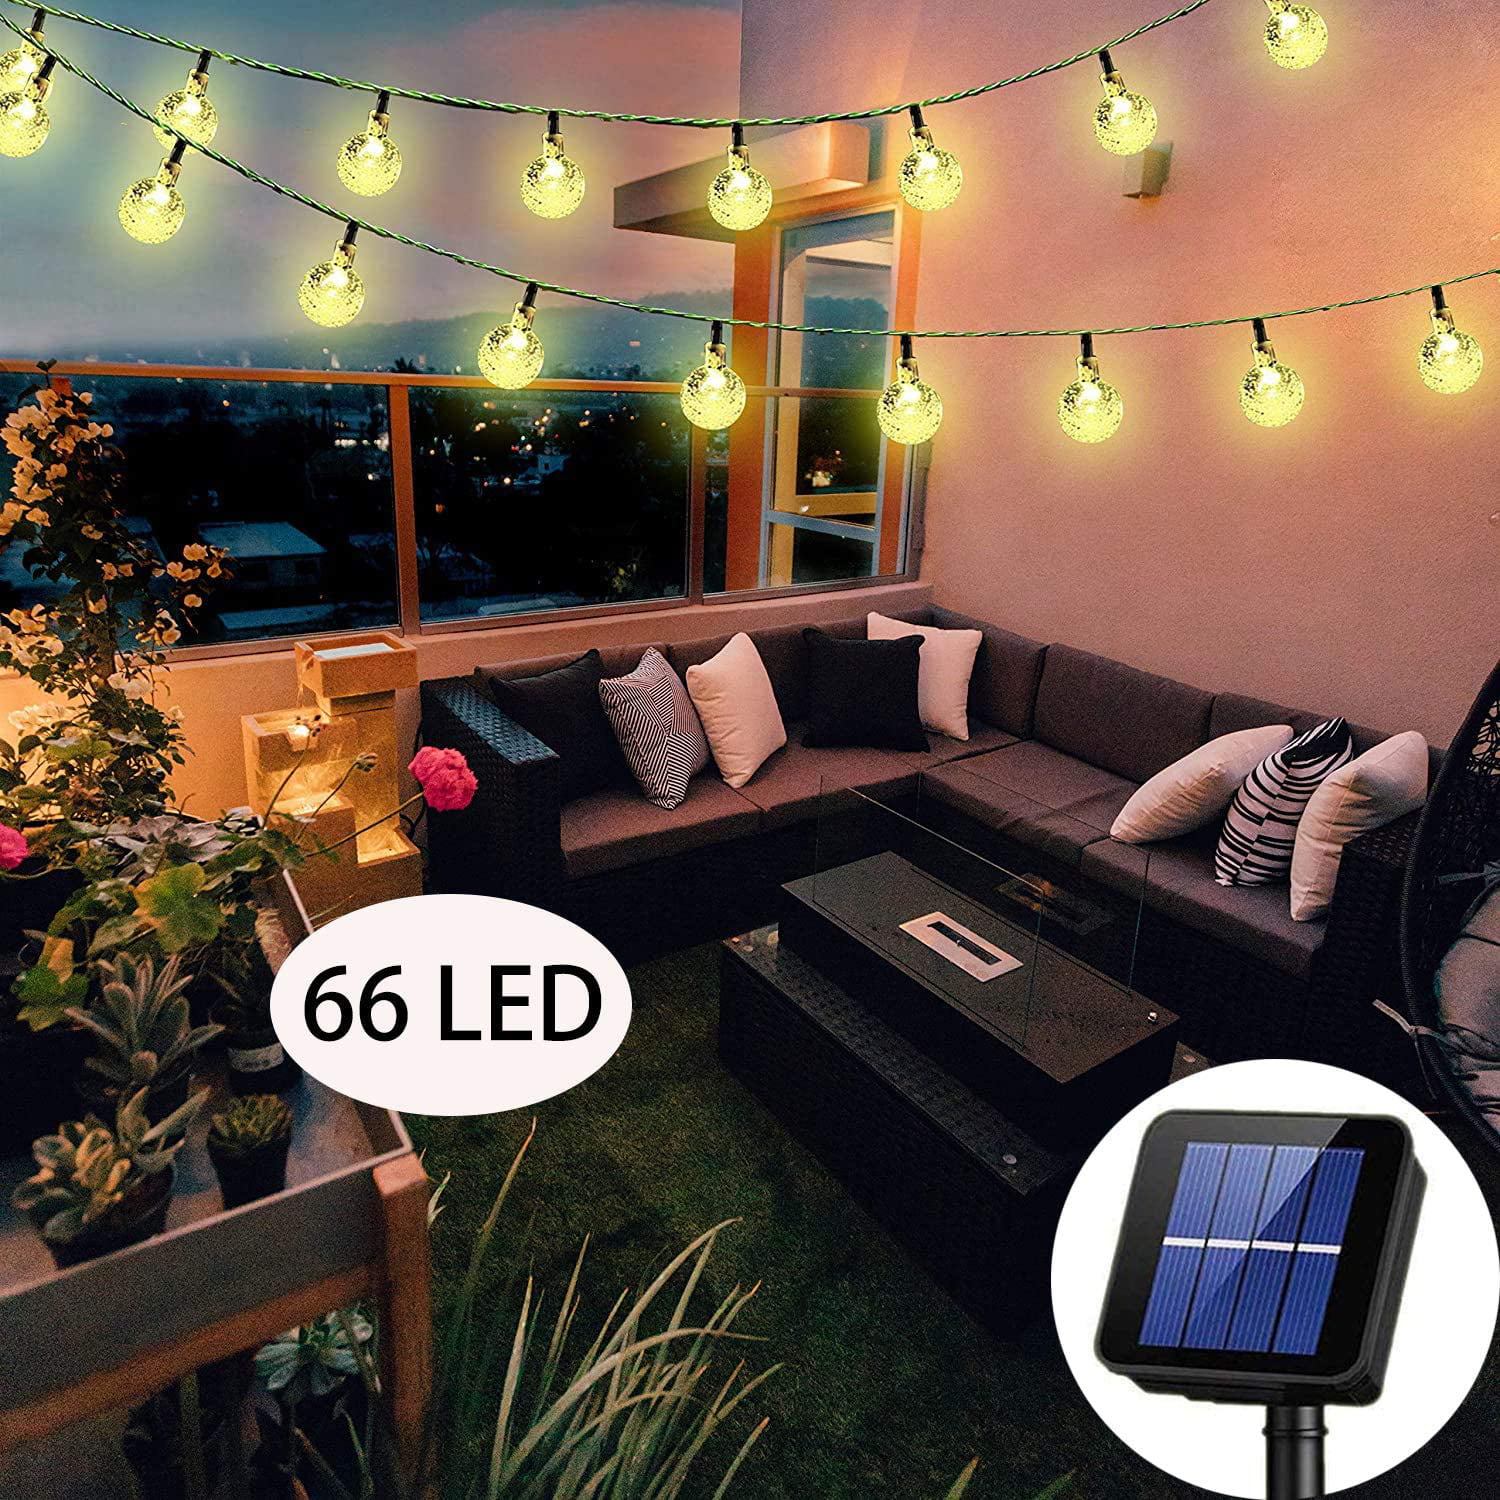 30 LED Round Ball String Light Fairy Wedding Party Waterproof Lamp Home Decor 